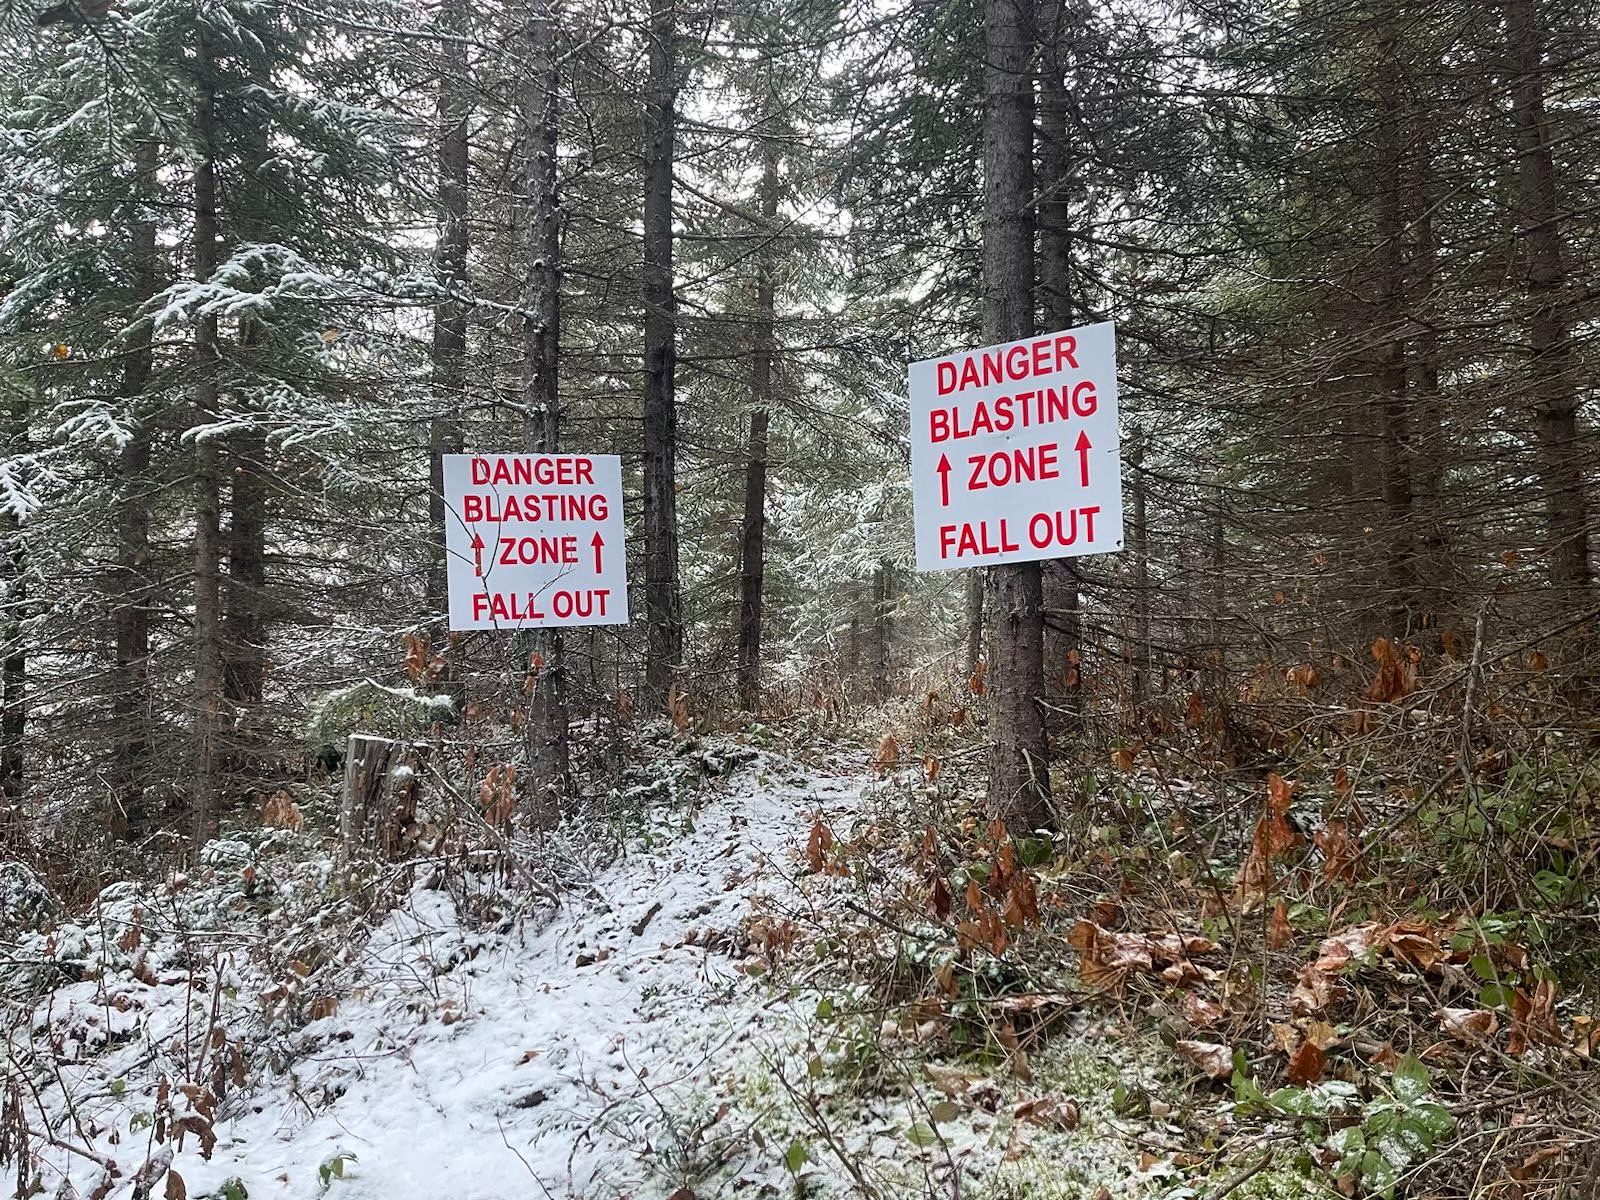 Snowy forested trail with signs on trees noting "danger blasting zone fall out"